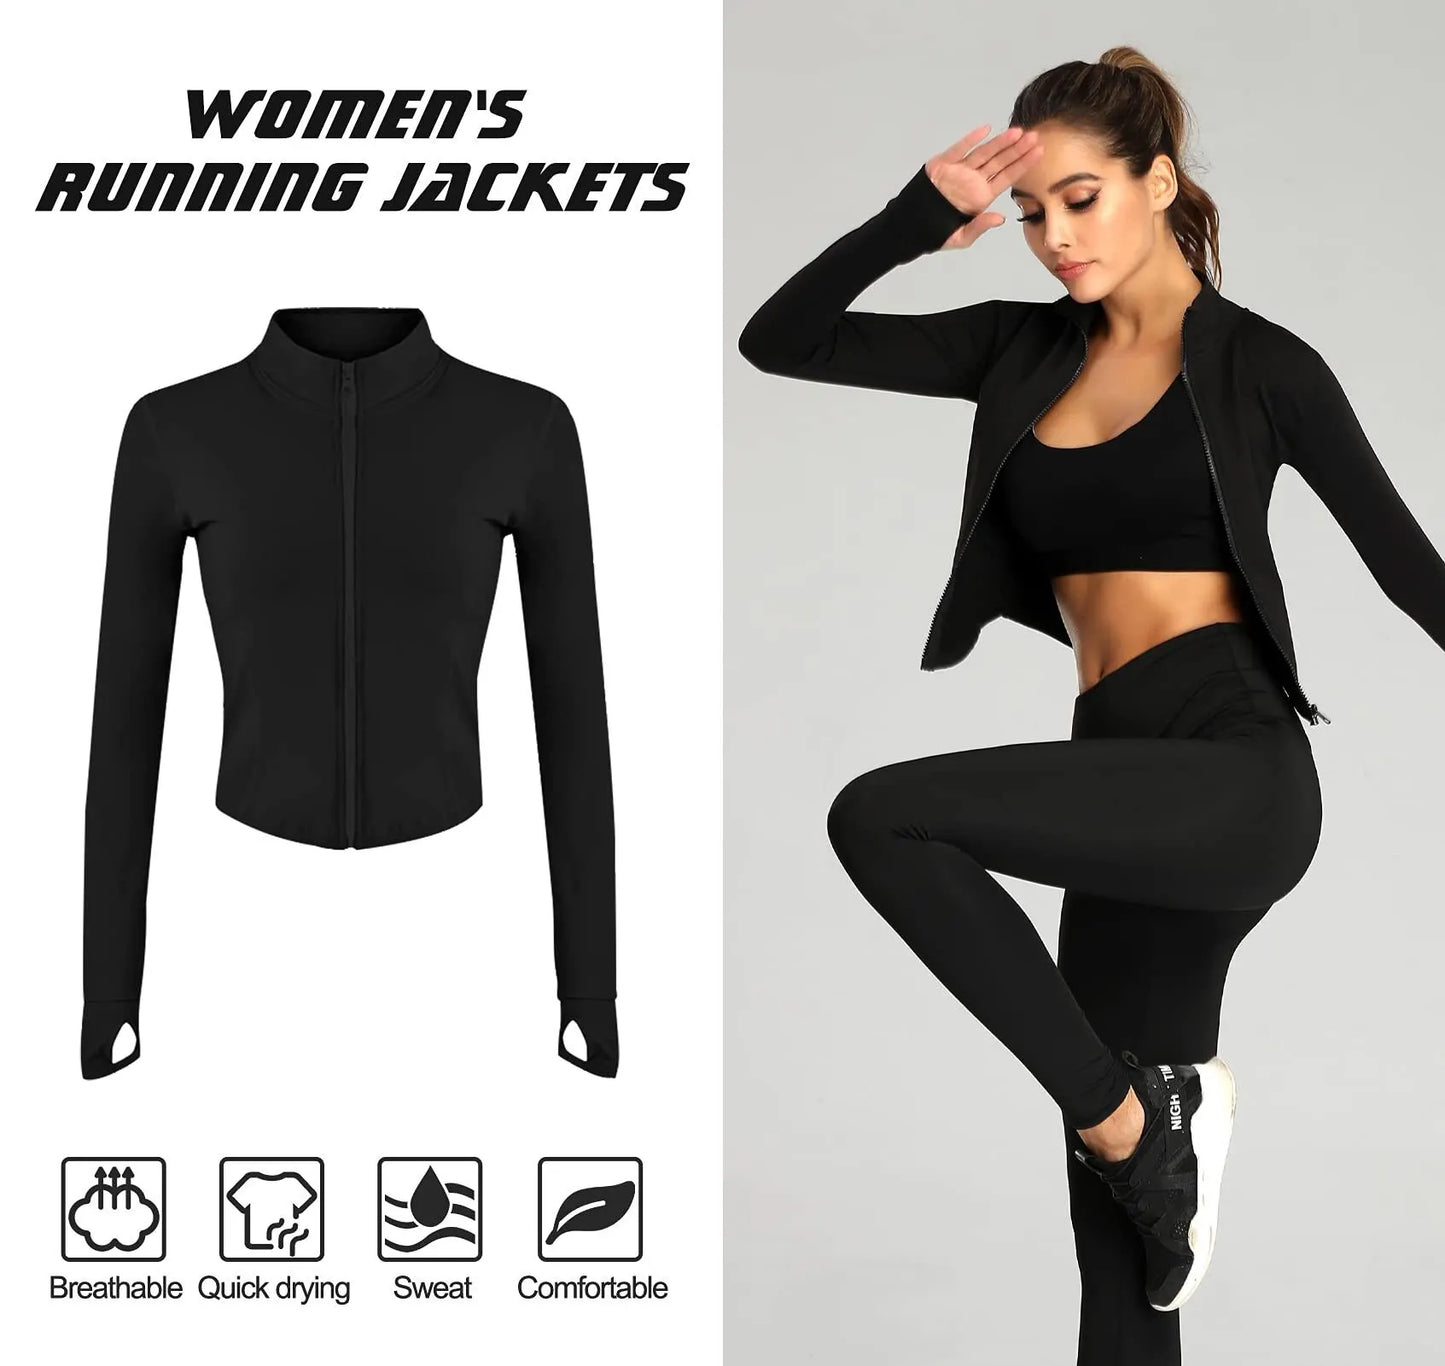 Women's Tracksuit Jacket Slim Fit Long Sleeved Fitness Coat Yoga Crop Tops With Thumb Holes Gym Jacket Workout Sweatshirts